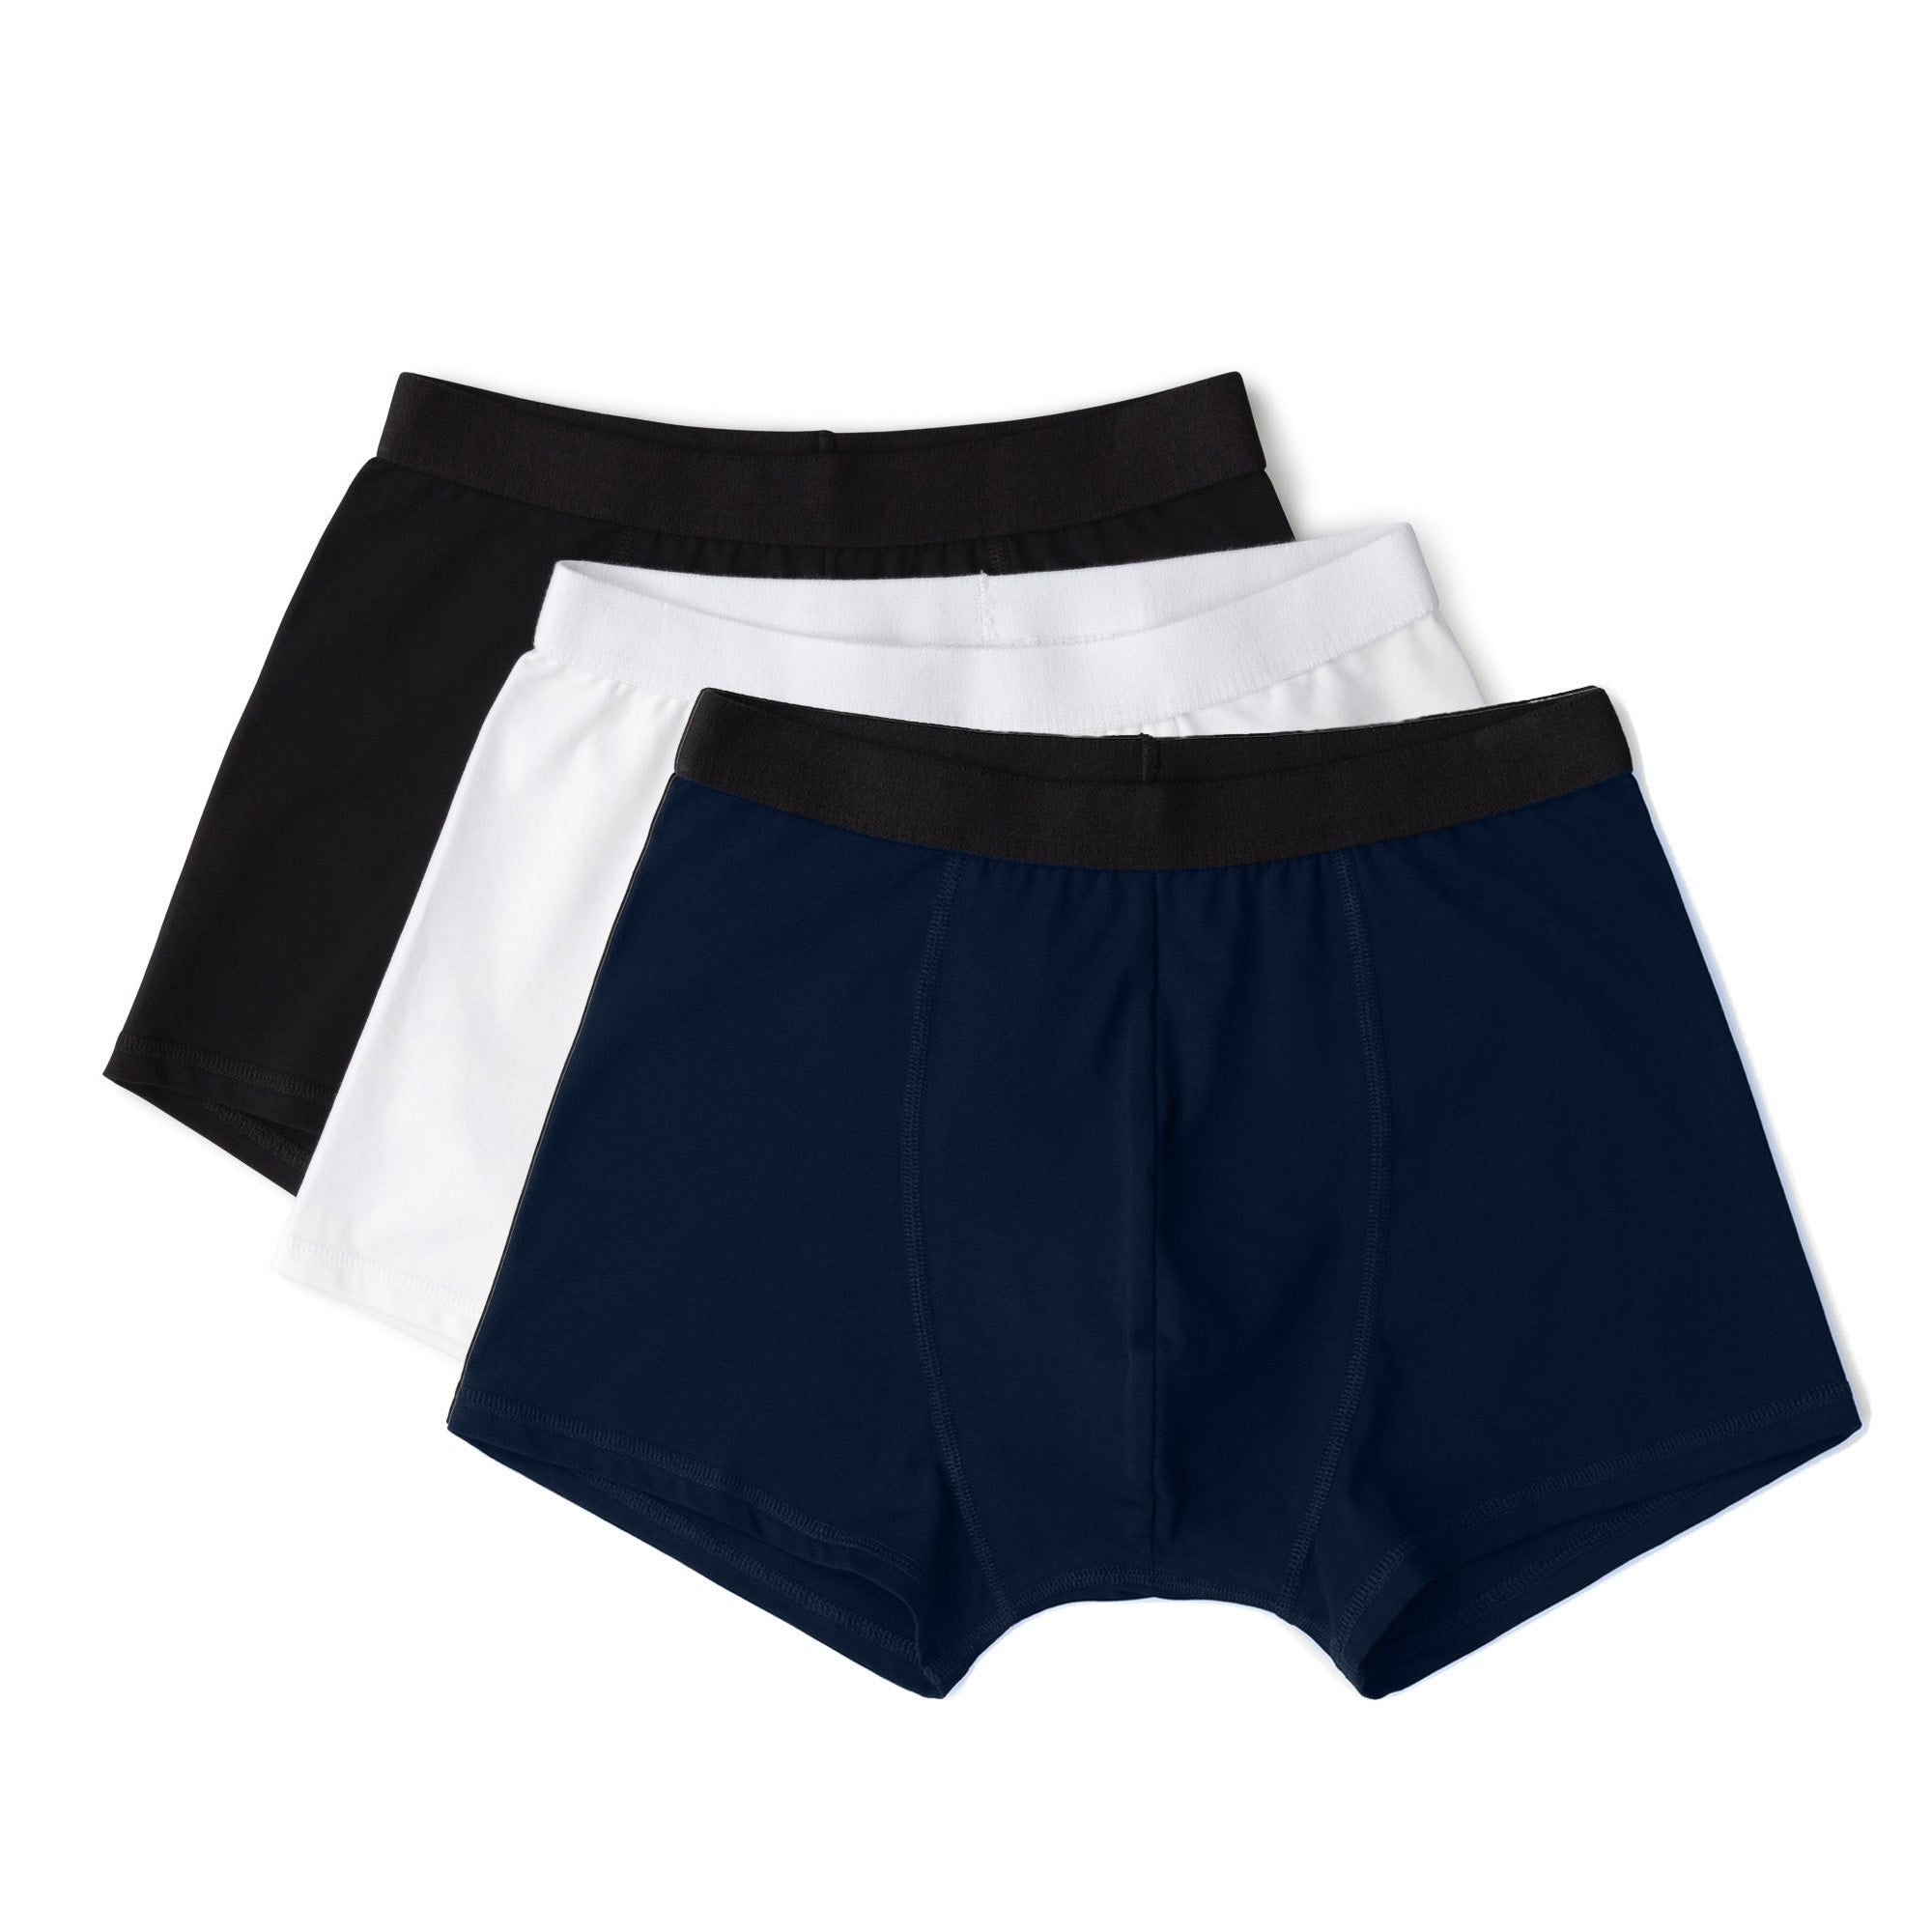 Black White Navy Organic & Recycled cotton Boxer Briefs 3 pack